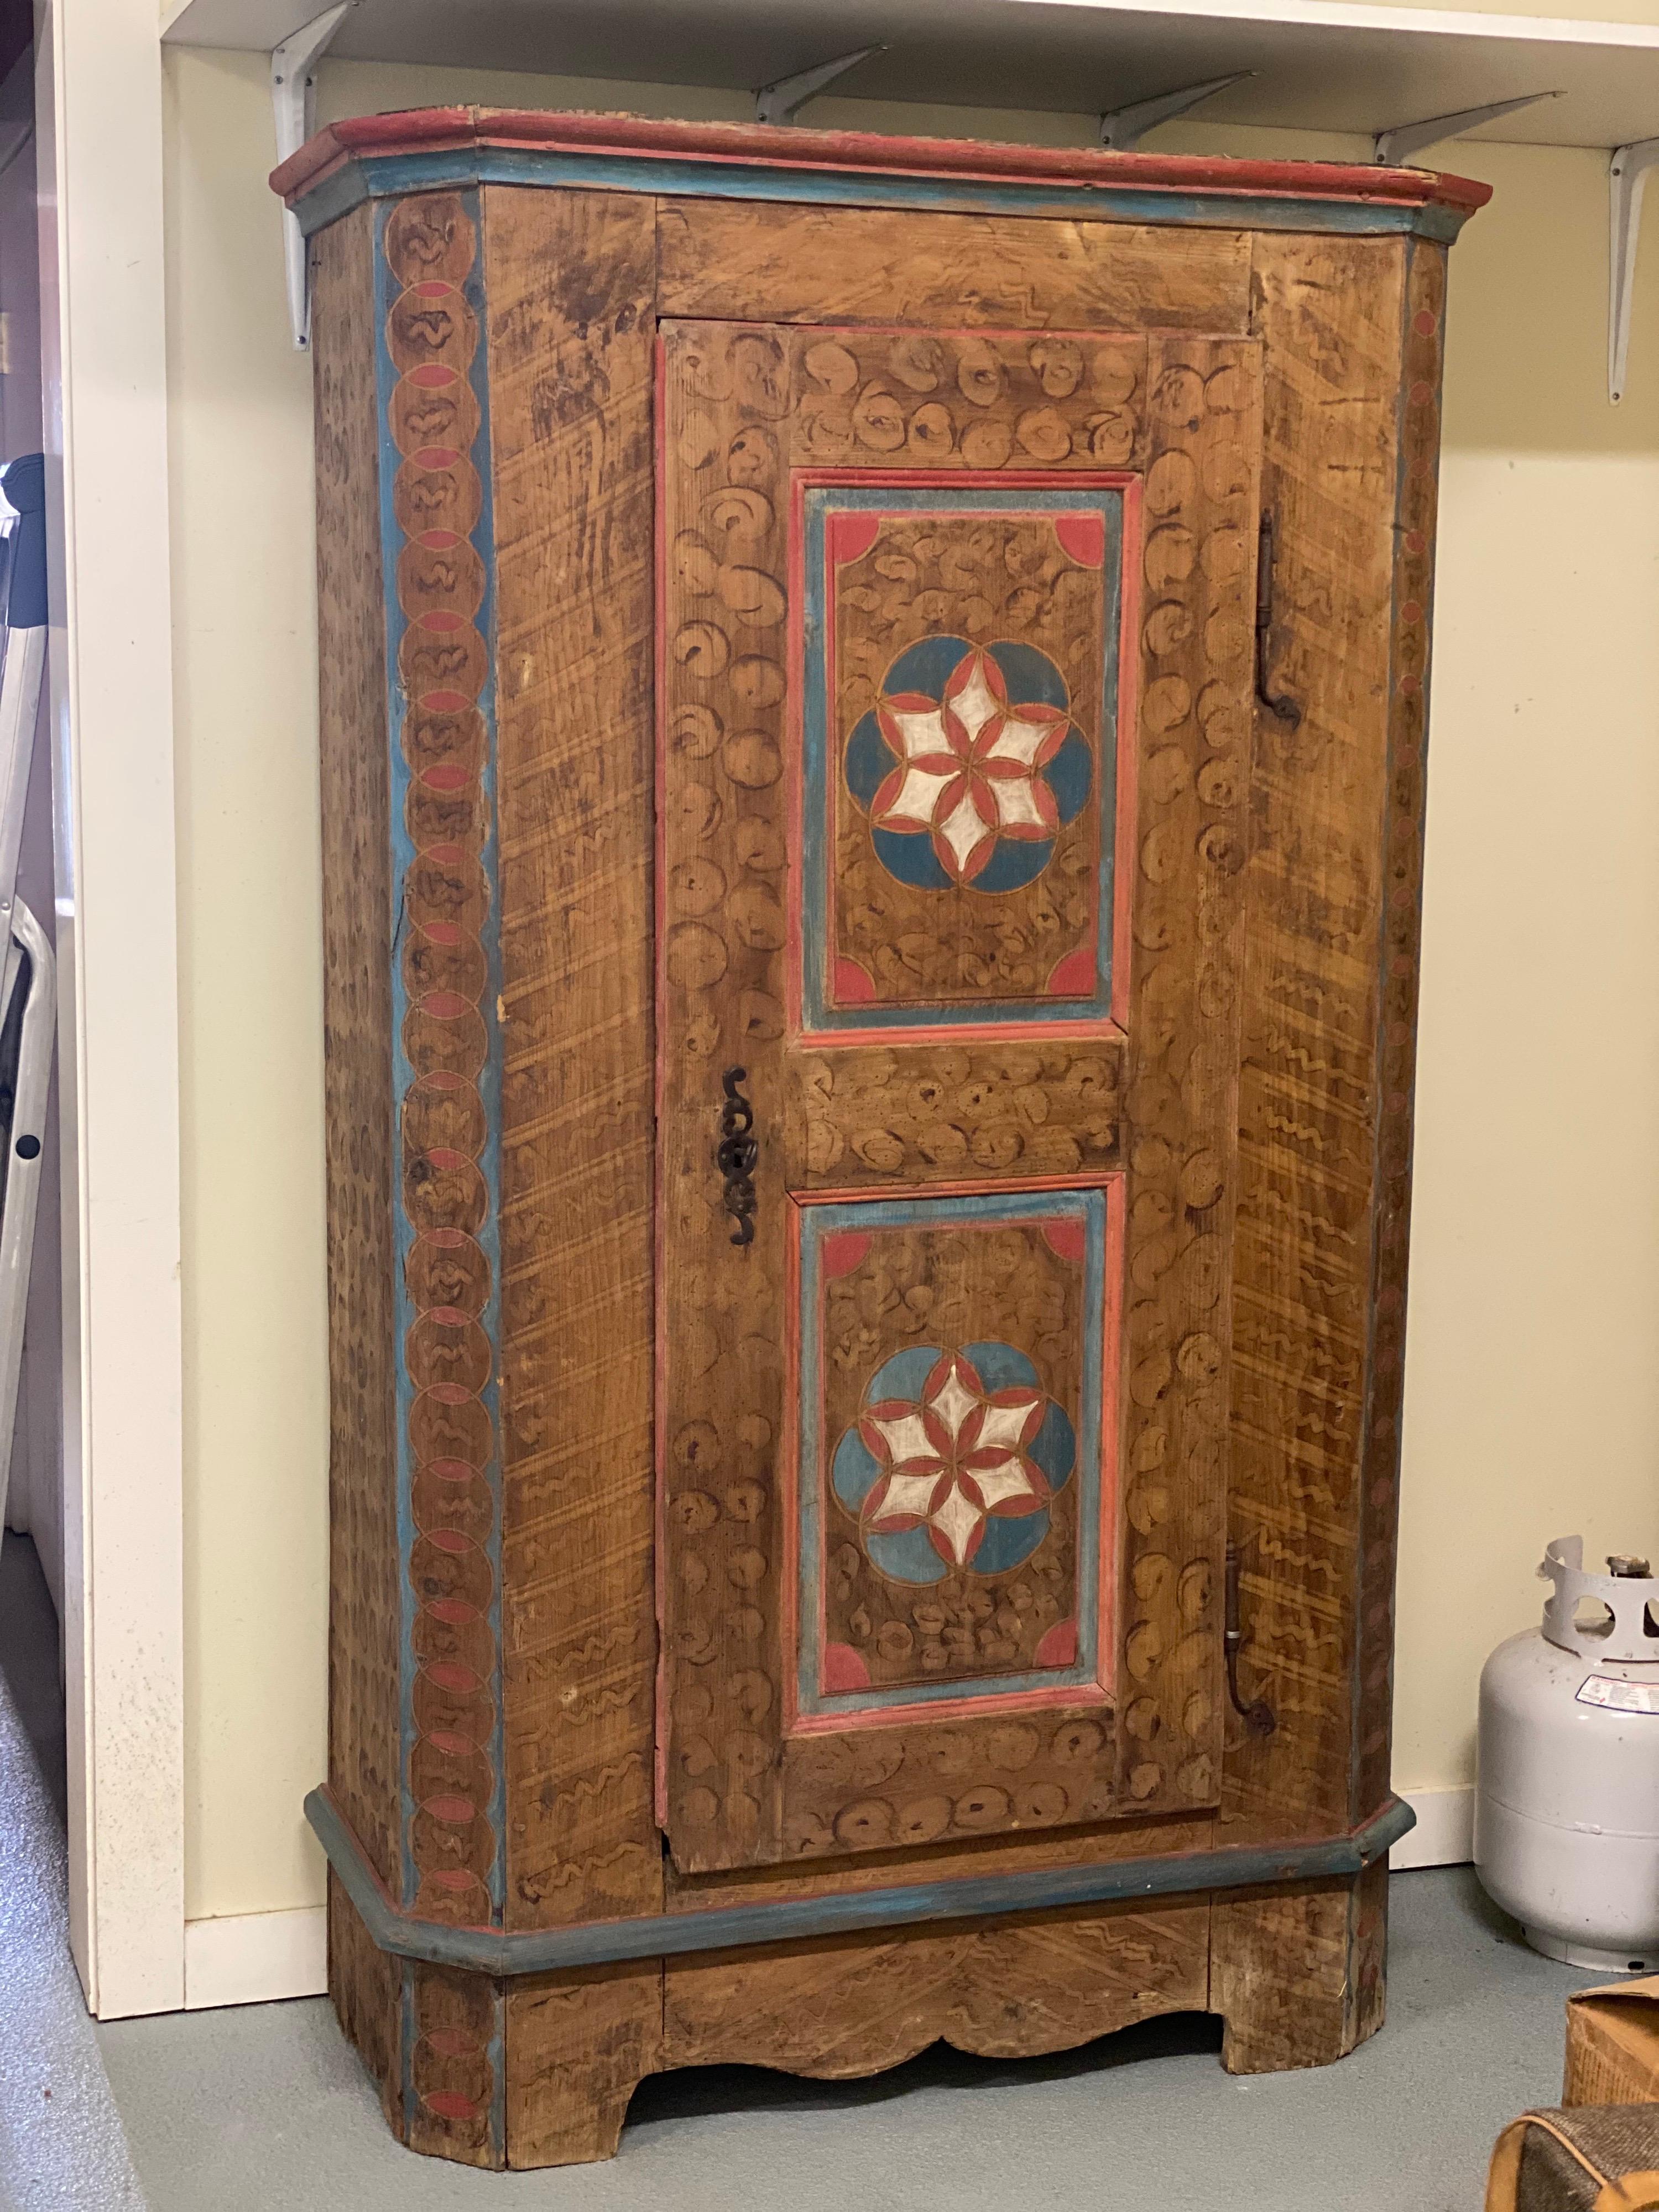 Antique Swedish folk art painted cabinet
Flower motif on central panel of door. Sponge painted with dark circles and blue and red perimeter paint. Unique piece.

Measures: 18.5” deep x 42” wide x 76” high

Good condition.
Provenance: Private